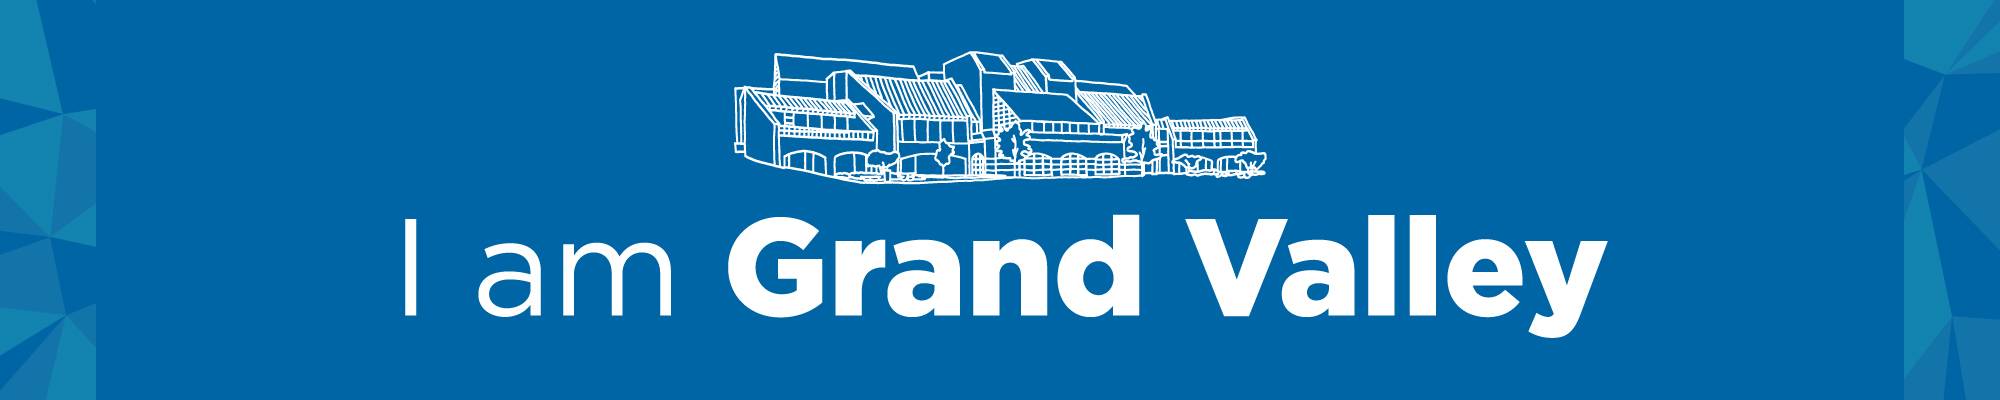 I am Grand Valley graphic